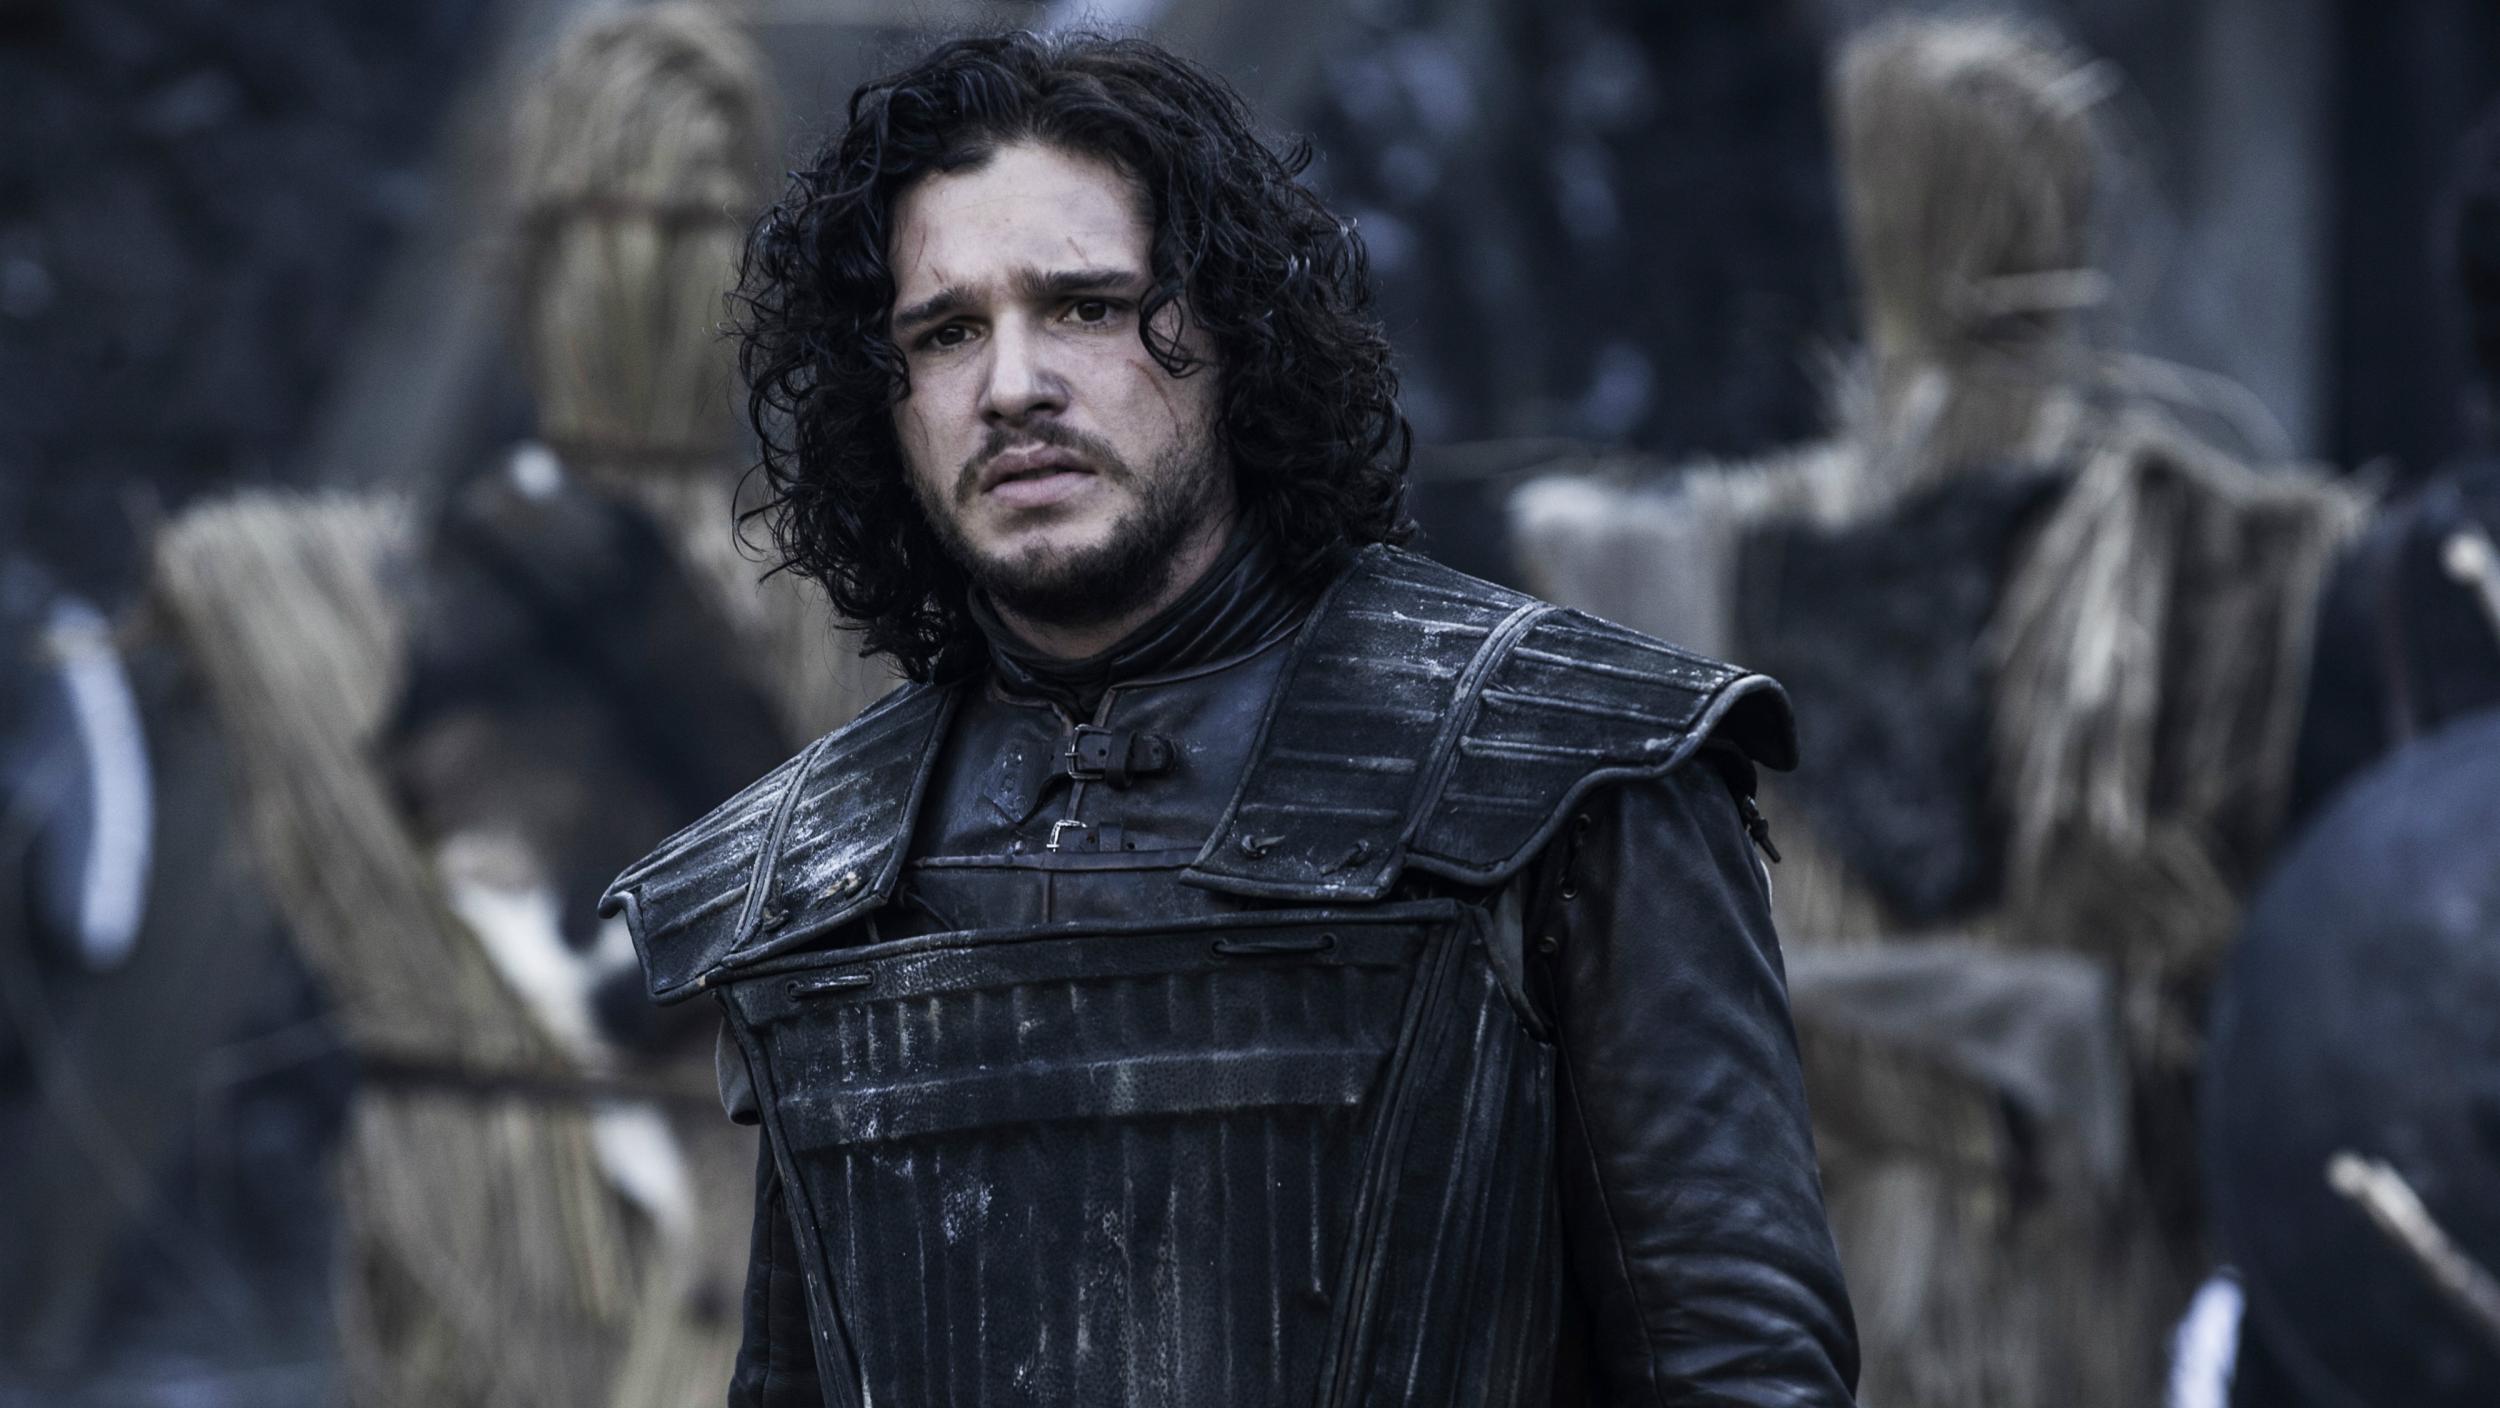 Sorry Jon Snow but you're not getting your own spin-off just yet